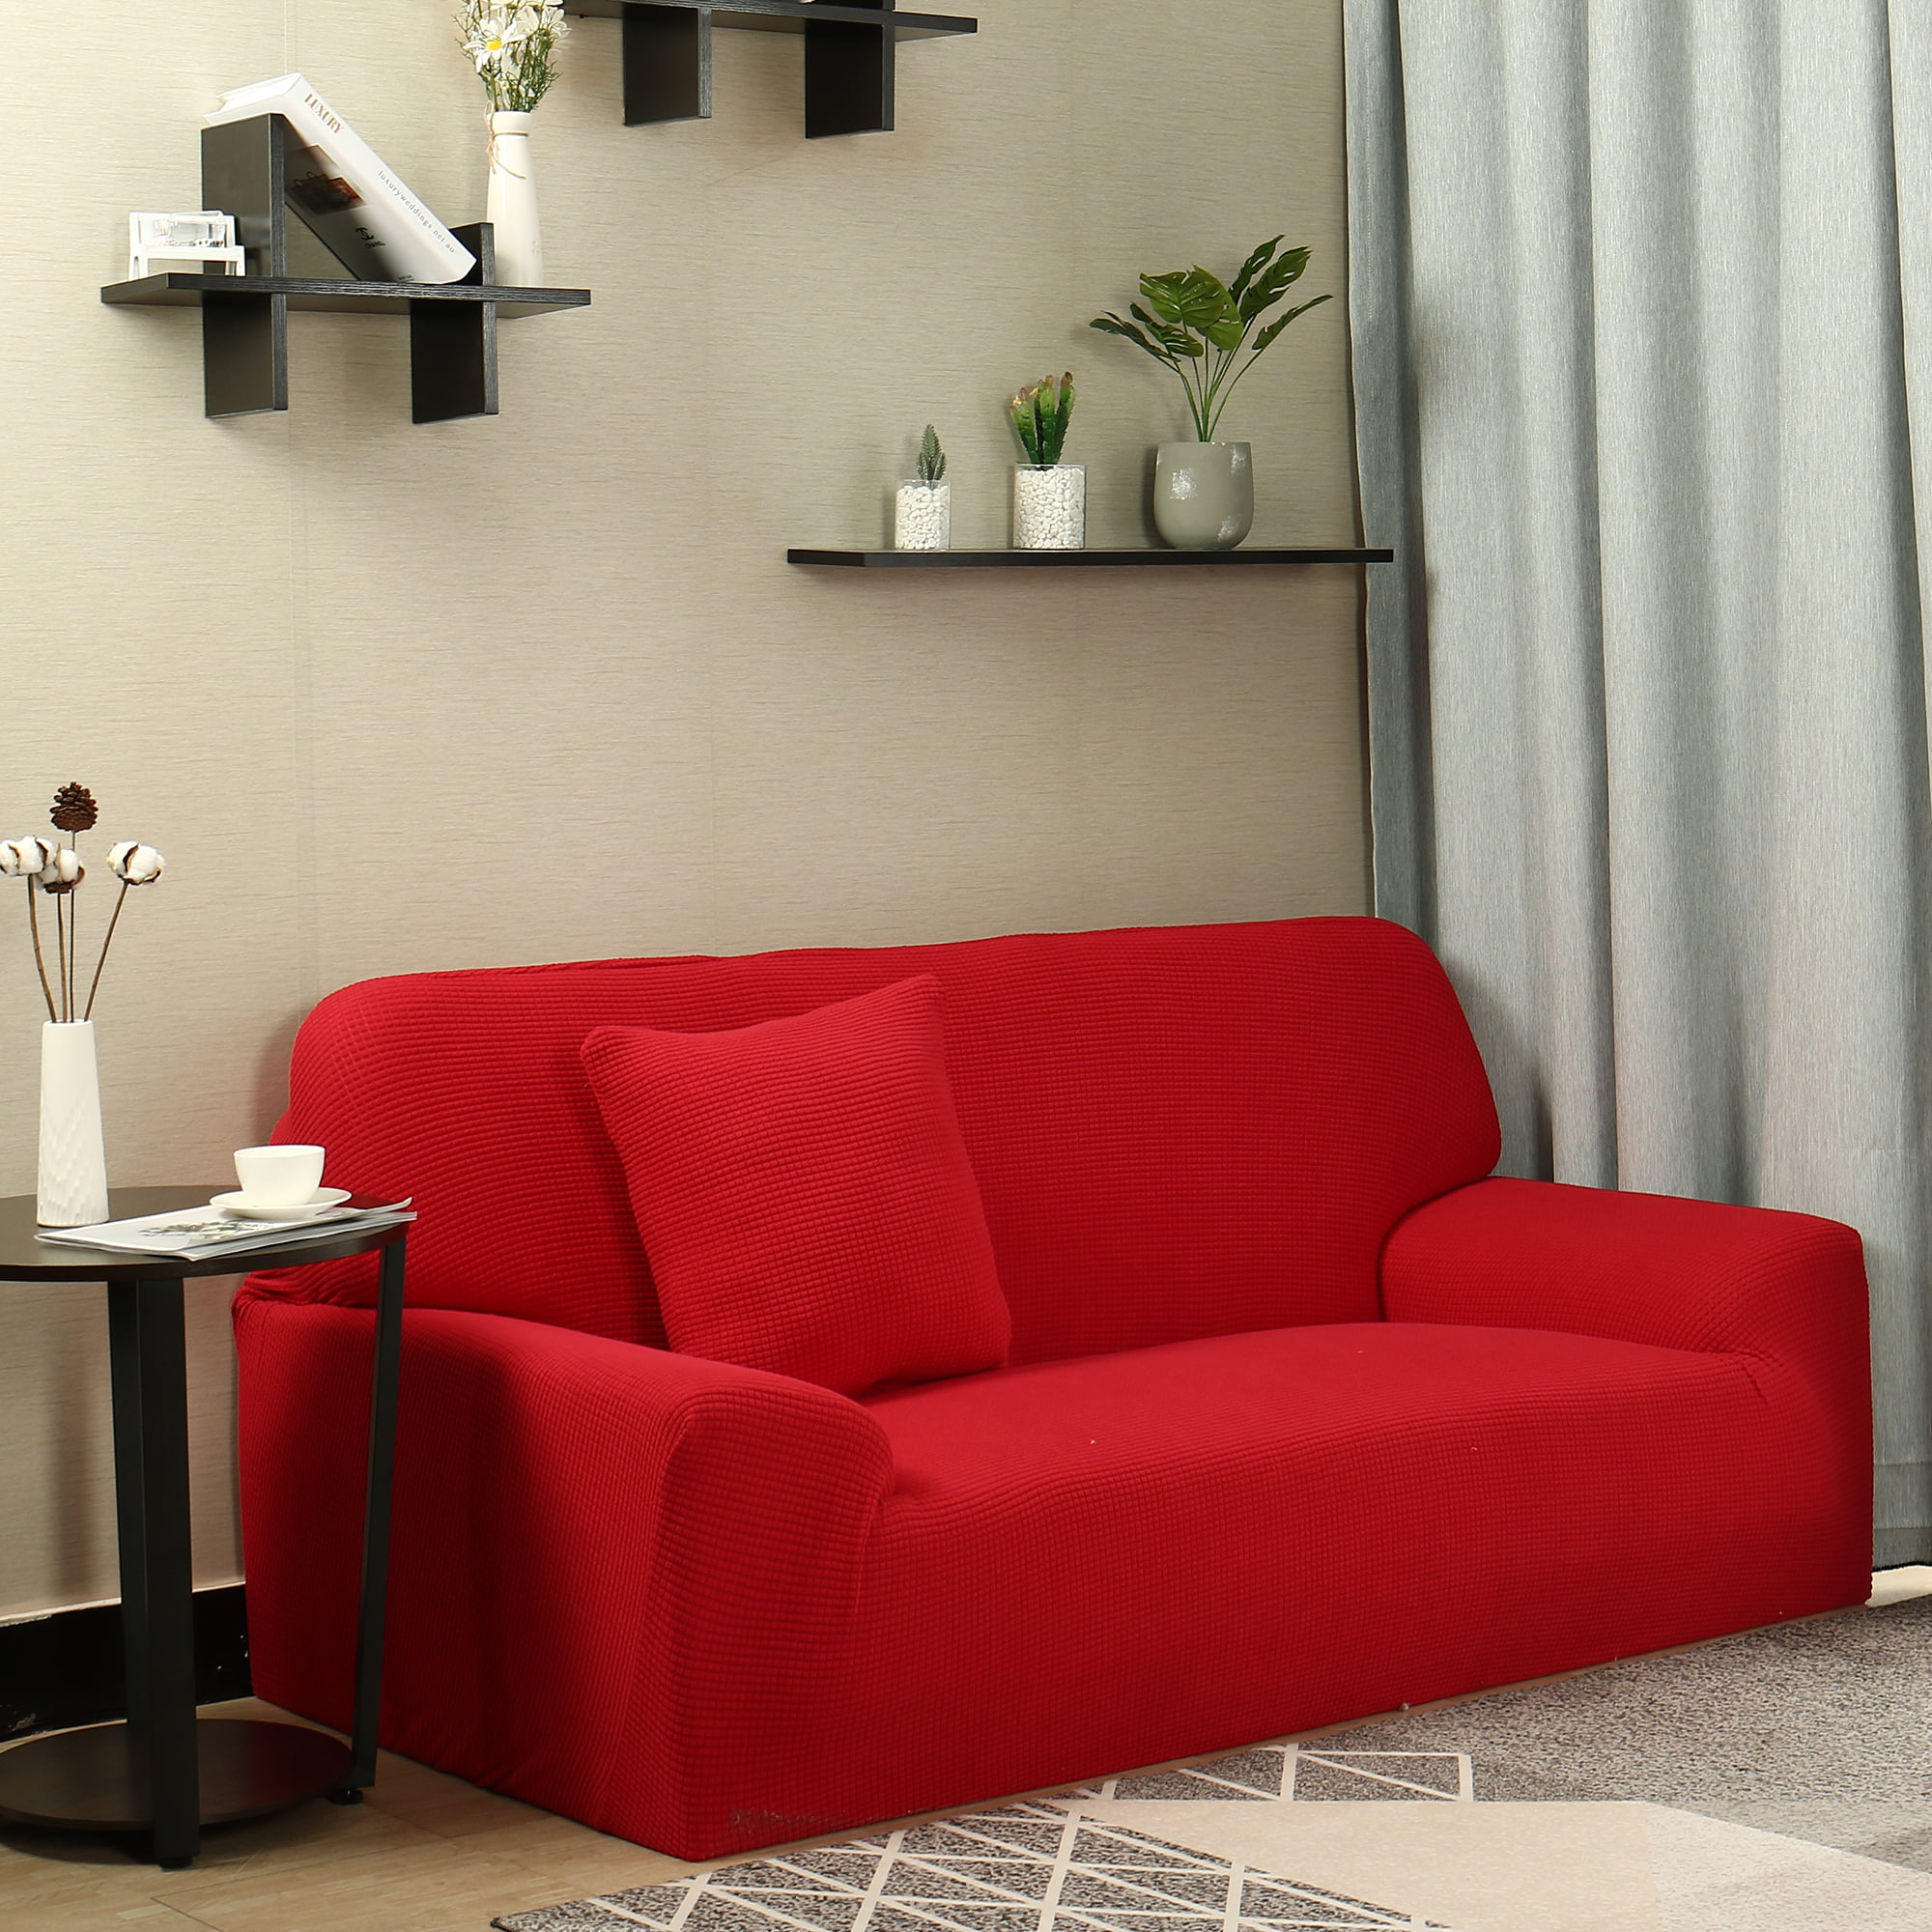 Details about   Modern Sofa Cover High Elastic Polyester Slipcover Furniture Protector Living R. 